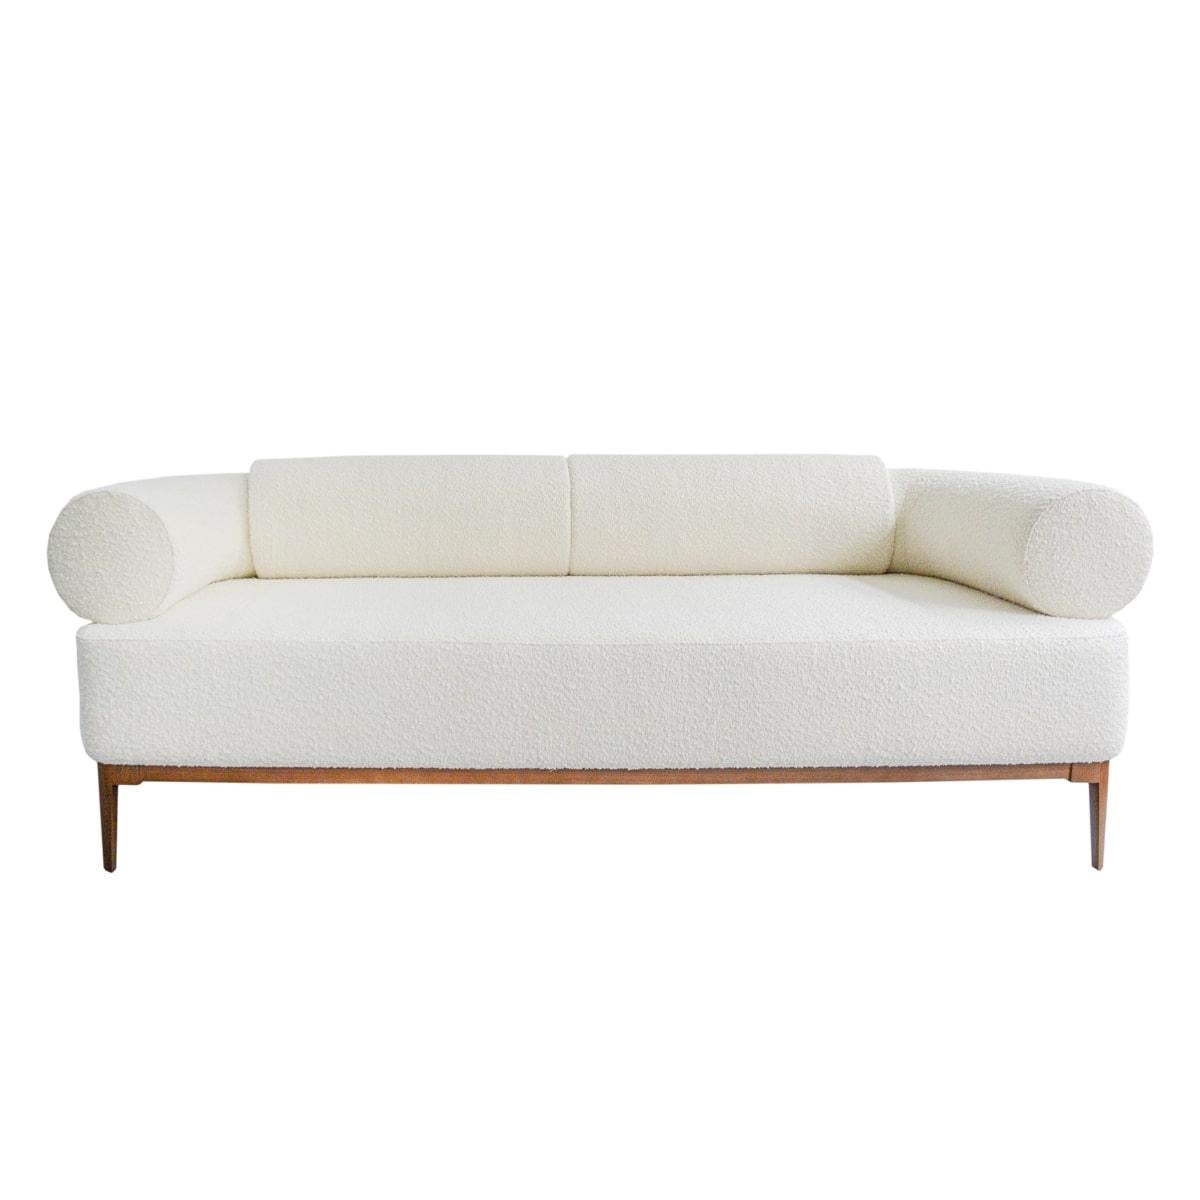 40kg foam + memory foam.

Introducing the Croissant sofa, a perfect blend of elegance and timelessness. Its graceful curves and distinctive shapes create a classic design that effortlessly complements your living room decor, adding a touch of